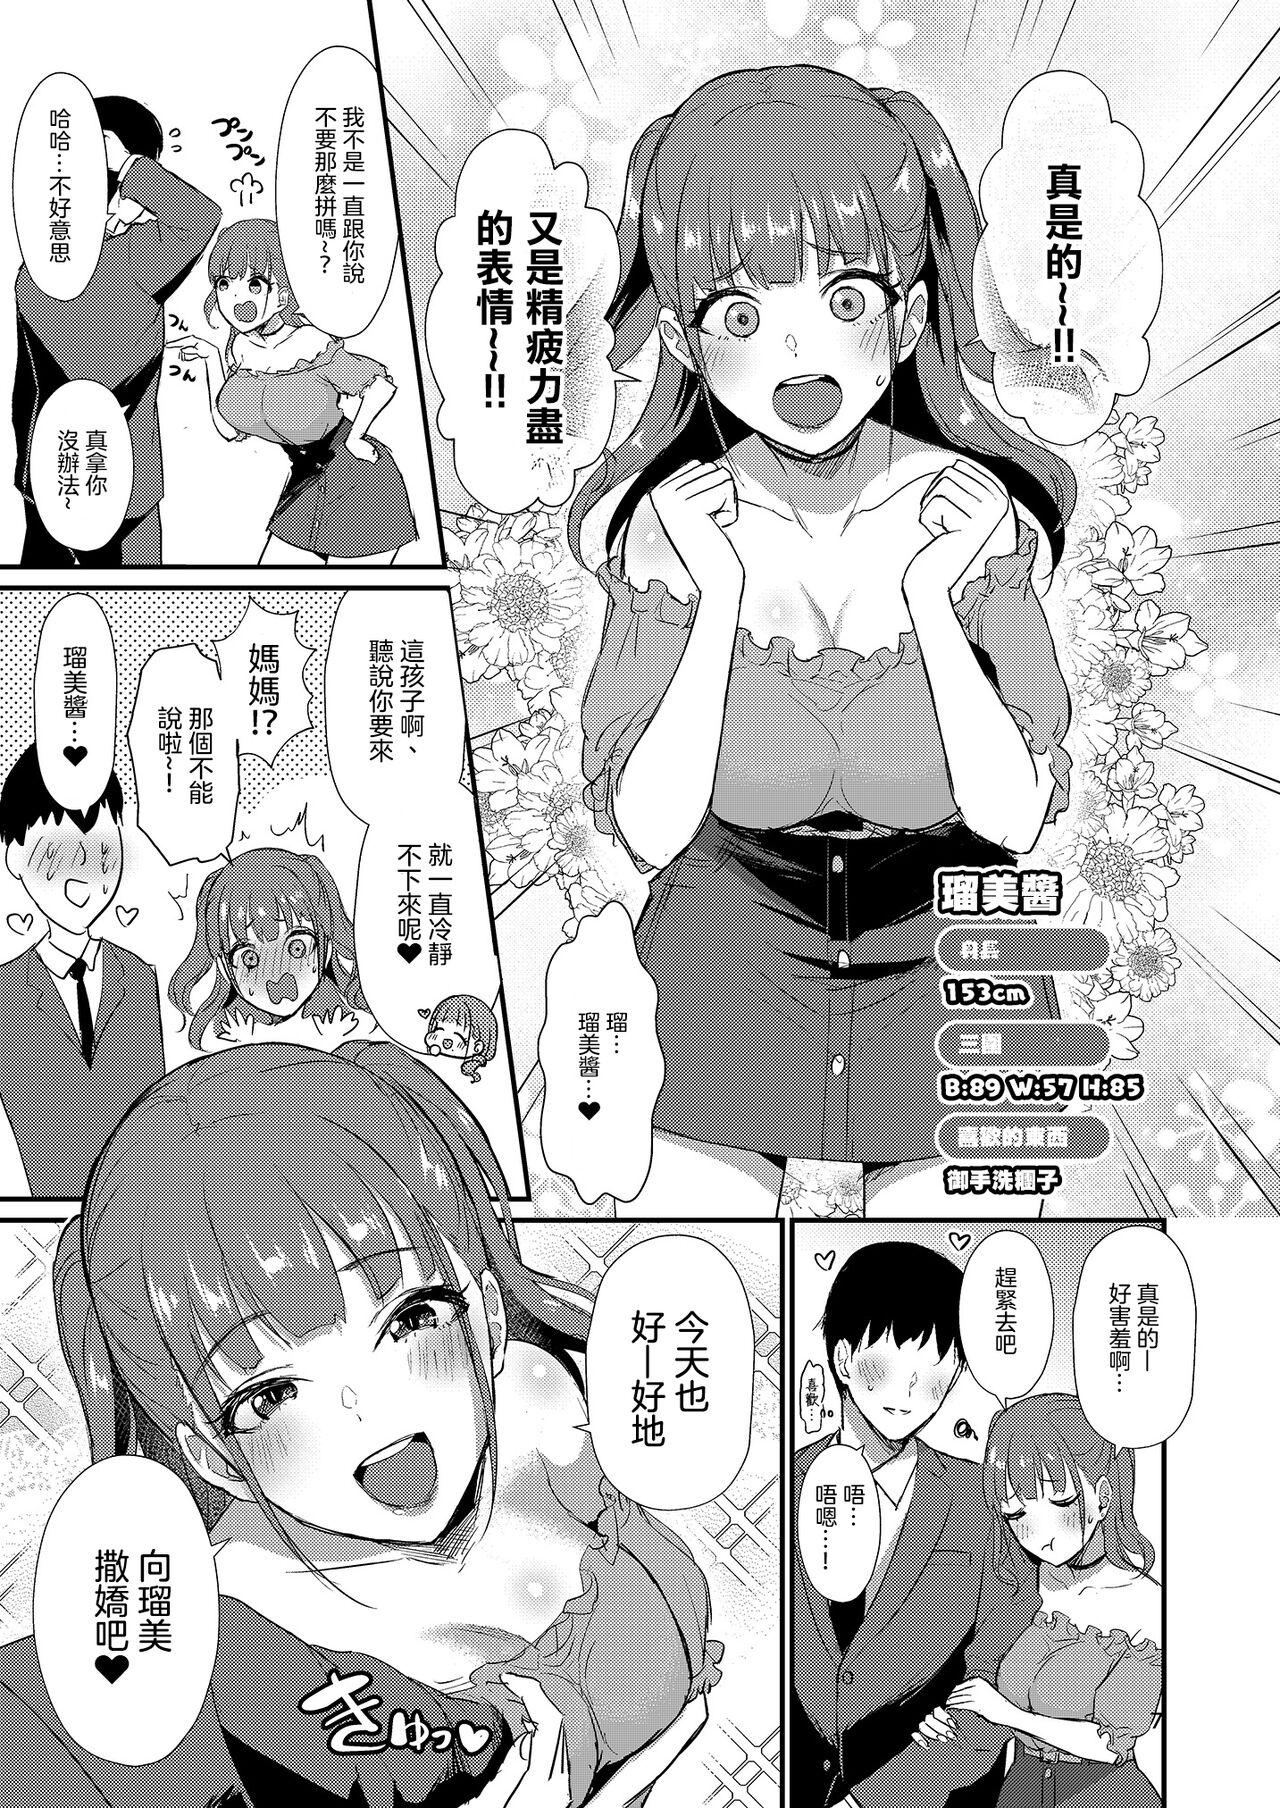 Shaved Pussy Homehome Home e Youkoso! - Welcome to Home Home Home! | 歡迎來到誇誇屋！ - Original Beard - Page 8